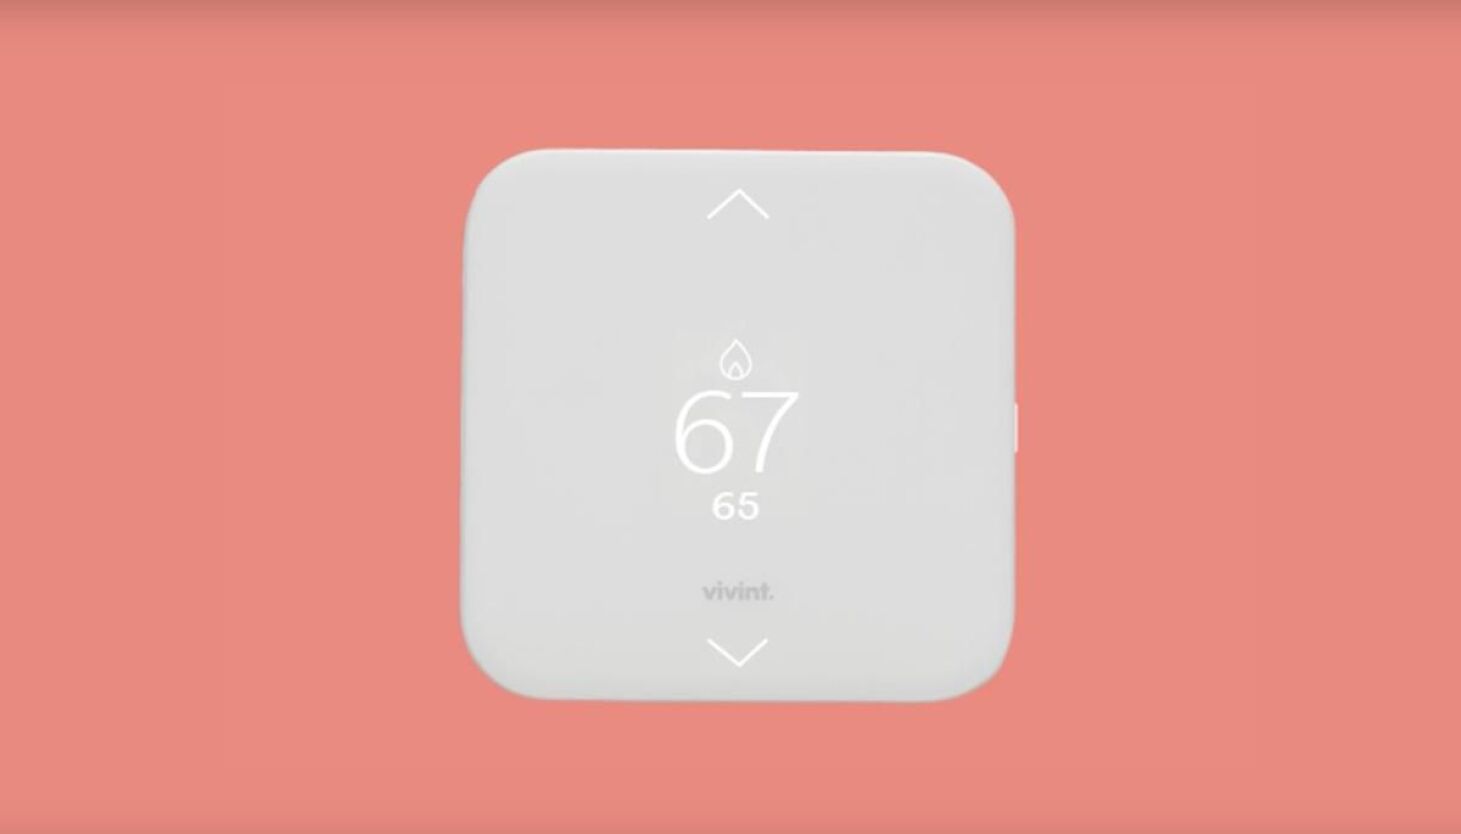 How To Reprogram A Vivint Smart Thermostat